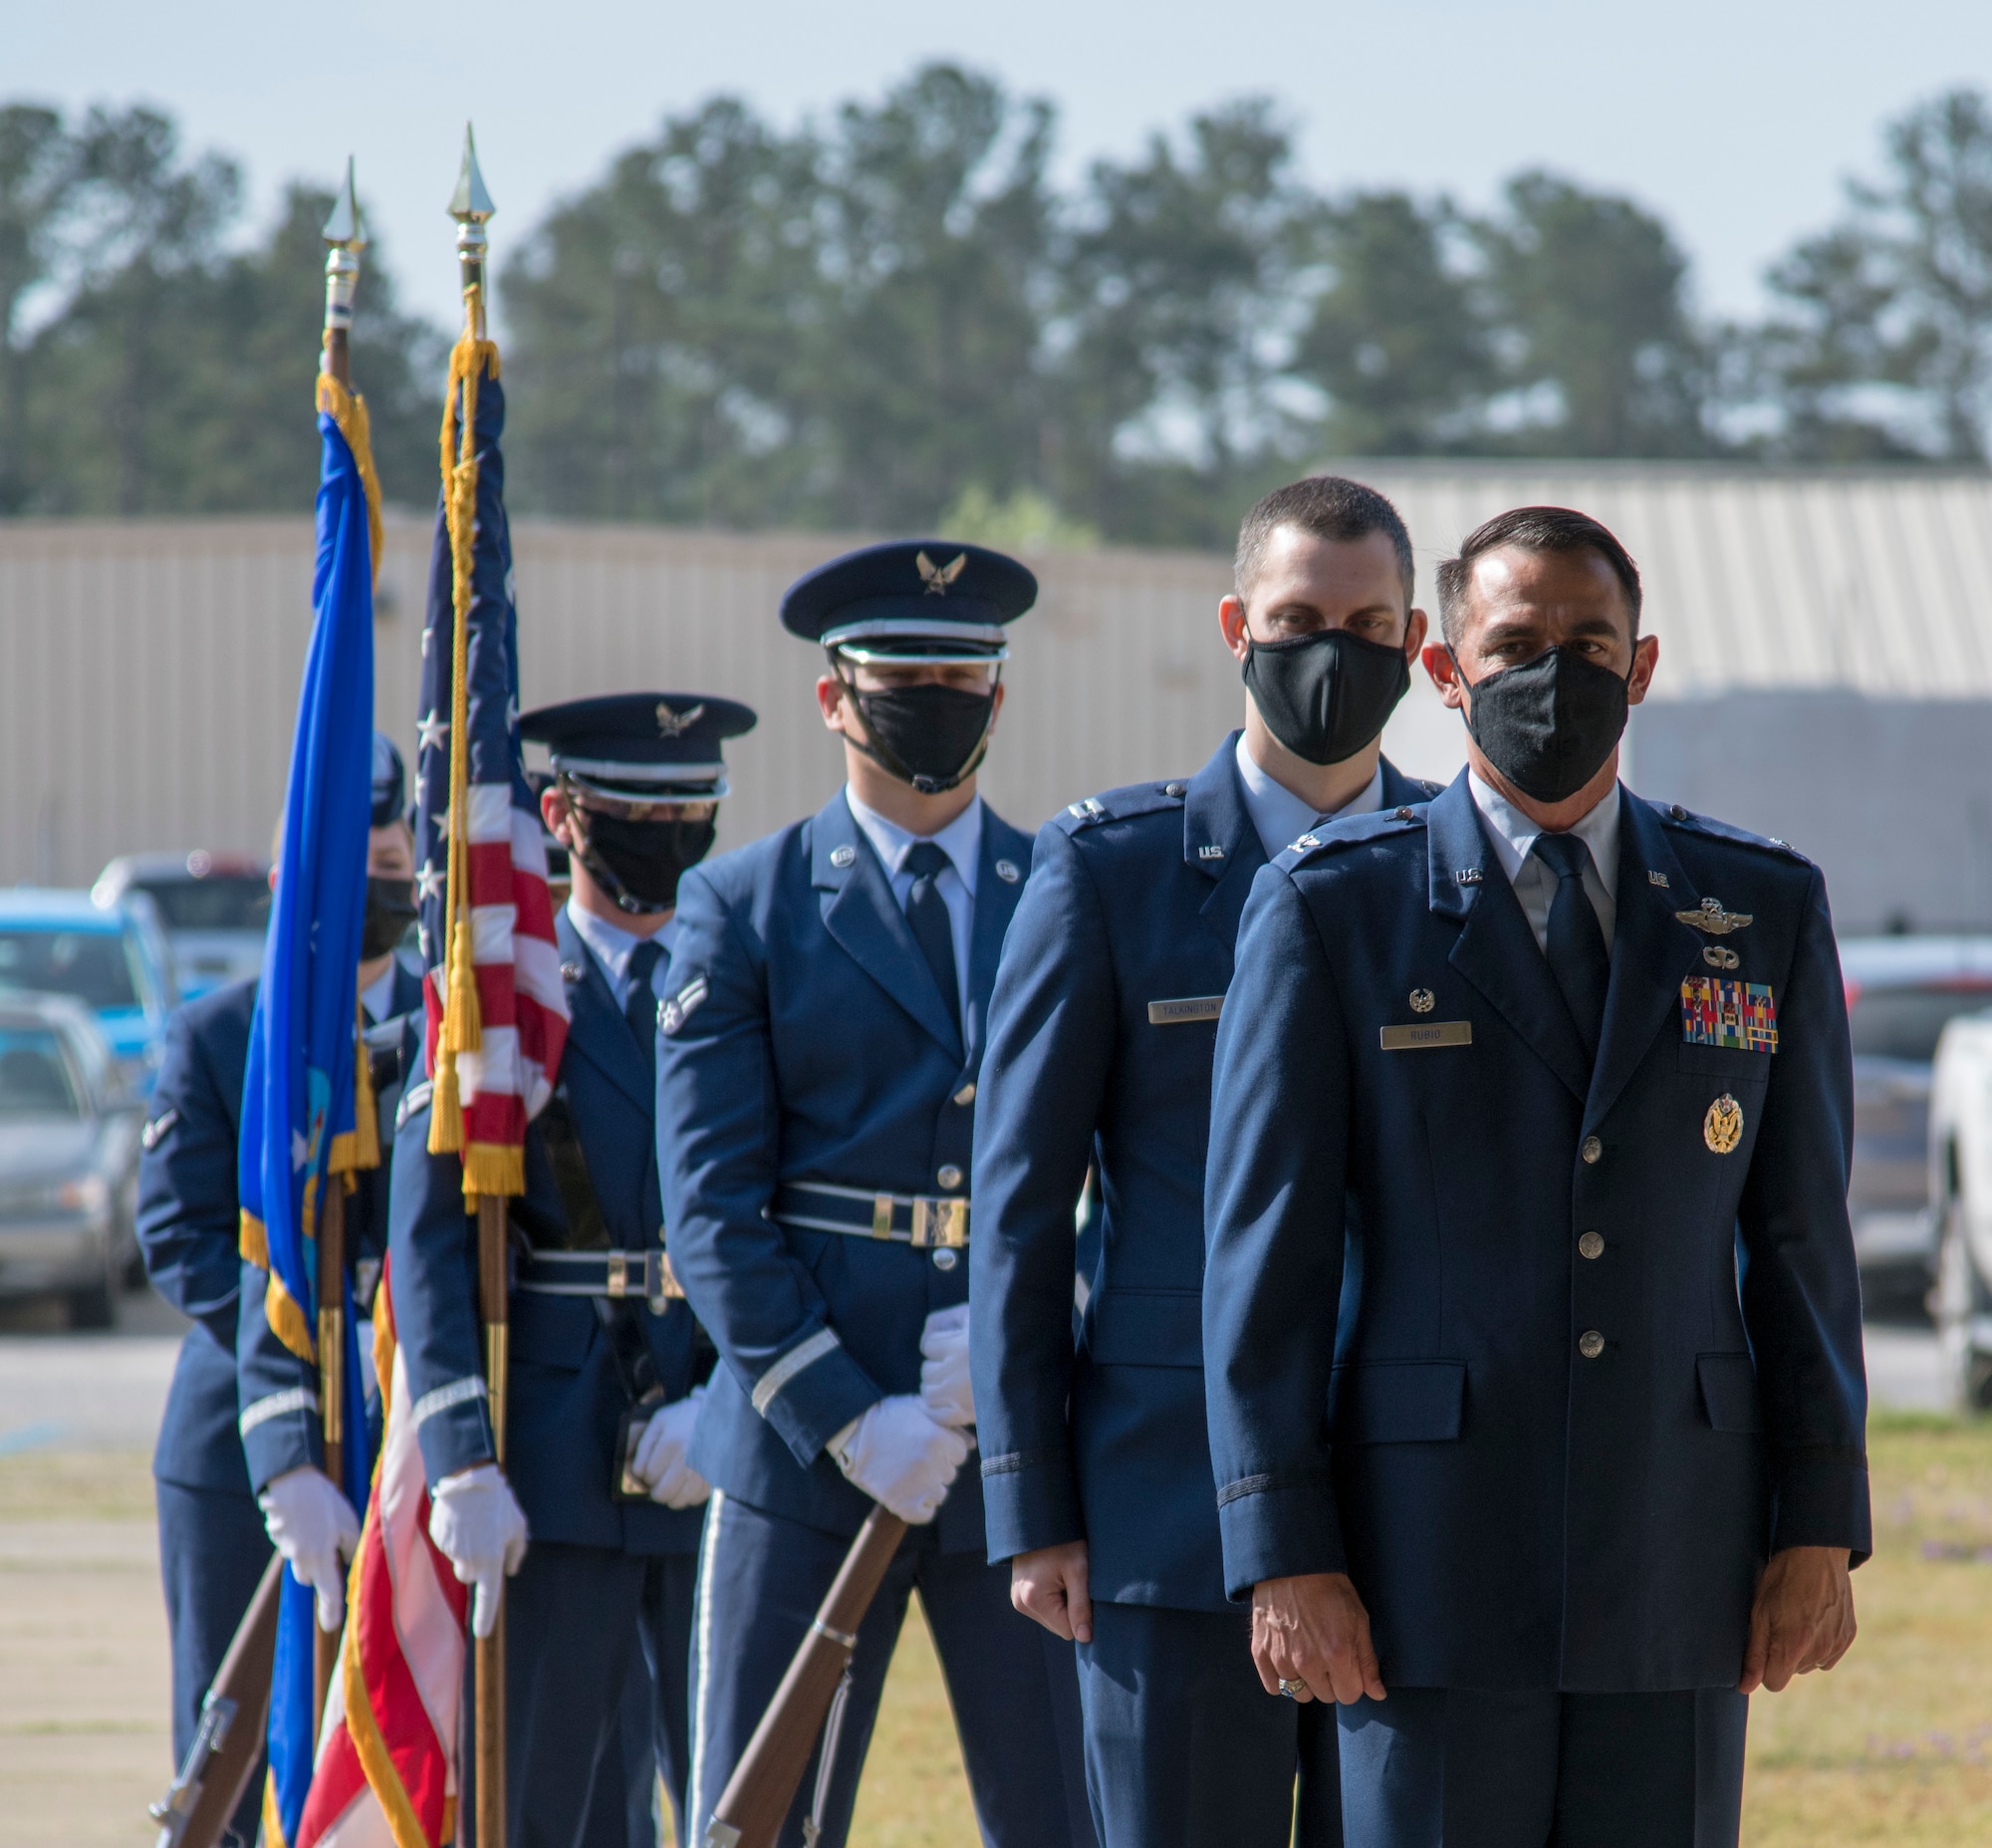 Col. Stuart M. Rubio, 403rd Operations Group commander at Keesler Air Force Base, Miss., and Capt. Grant J. Talkington, 5th Operational Weather Flight commander at Shaw Air Force Base, S.C., along with members of the Shaw AFB honor guard await commands during an assumption of command ceremony at the 28th Operational Weather Squadron pavilion April 9, 2021. Talkington assumed command of the flight after previously serving as its director of operations. (U.S. Air Force photo by Staff Sgt. Kristen Pittman)